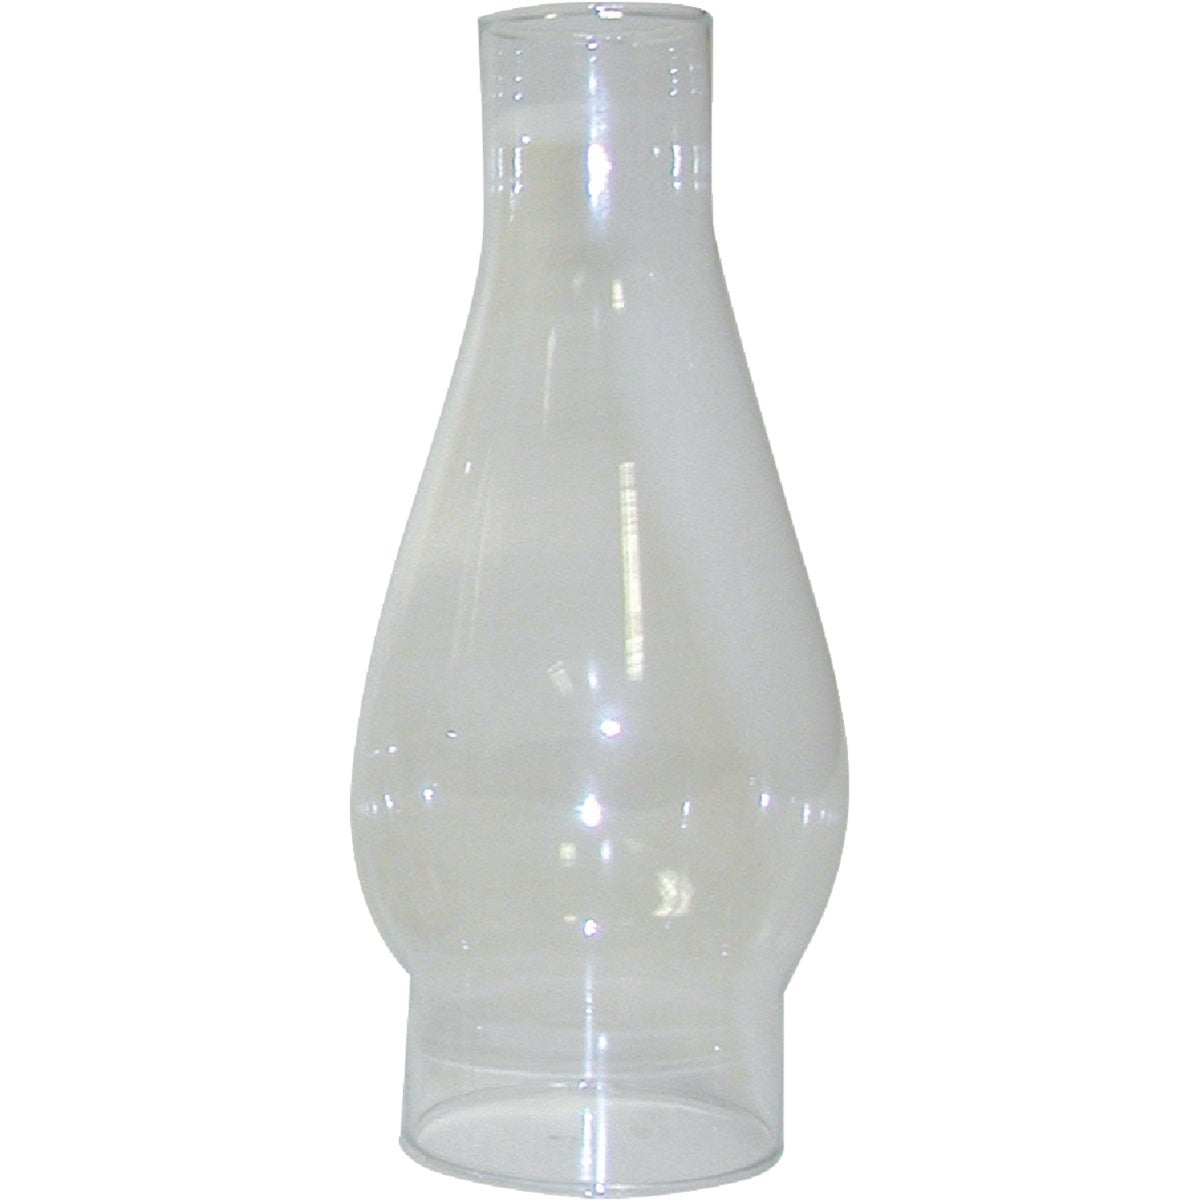 Item 601812, Replacement chimney fits Chamber and Traditions oil lamps with 2-5/8 In.